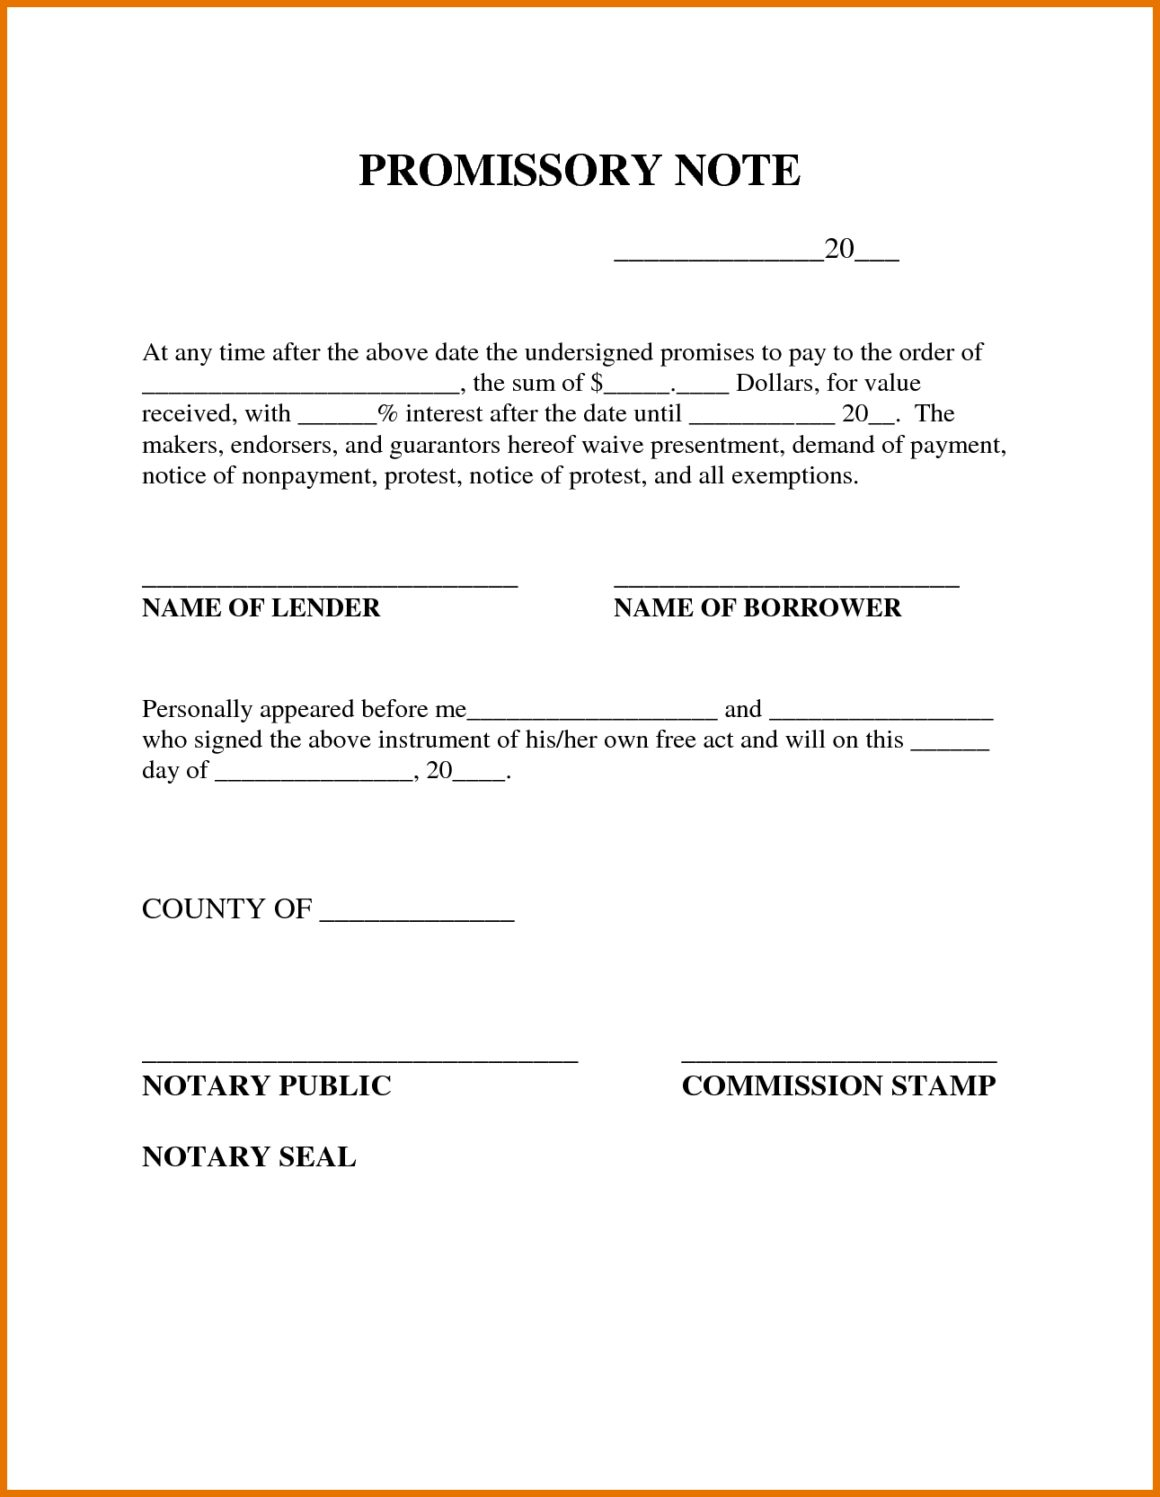 Clever Promissory Note Template From Borrower To Lender With Loan Promissory Note Template